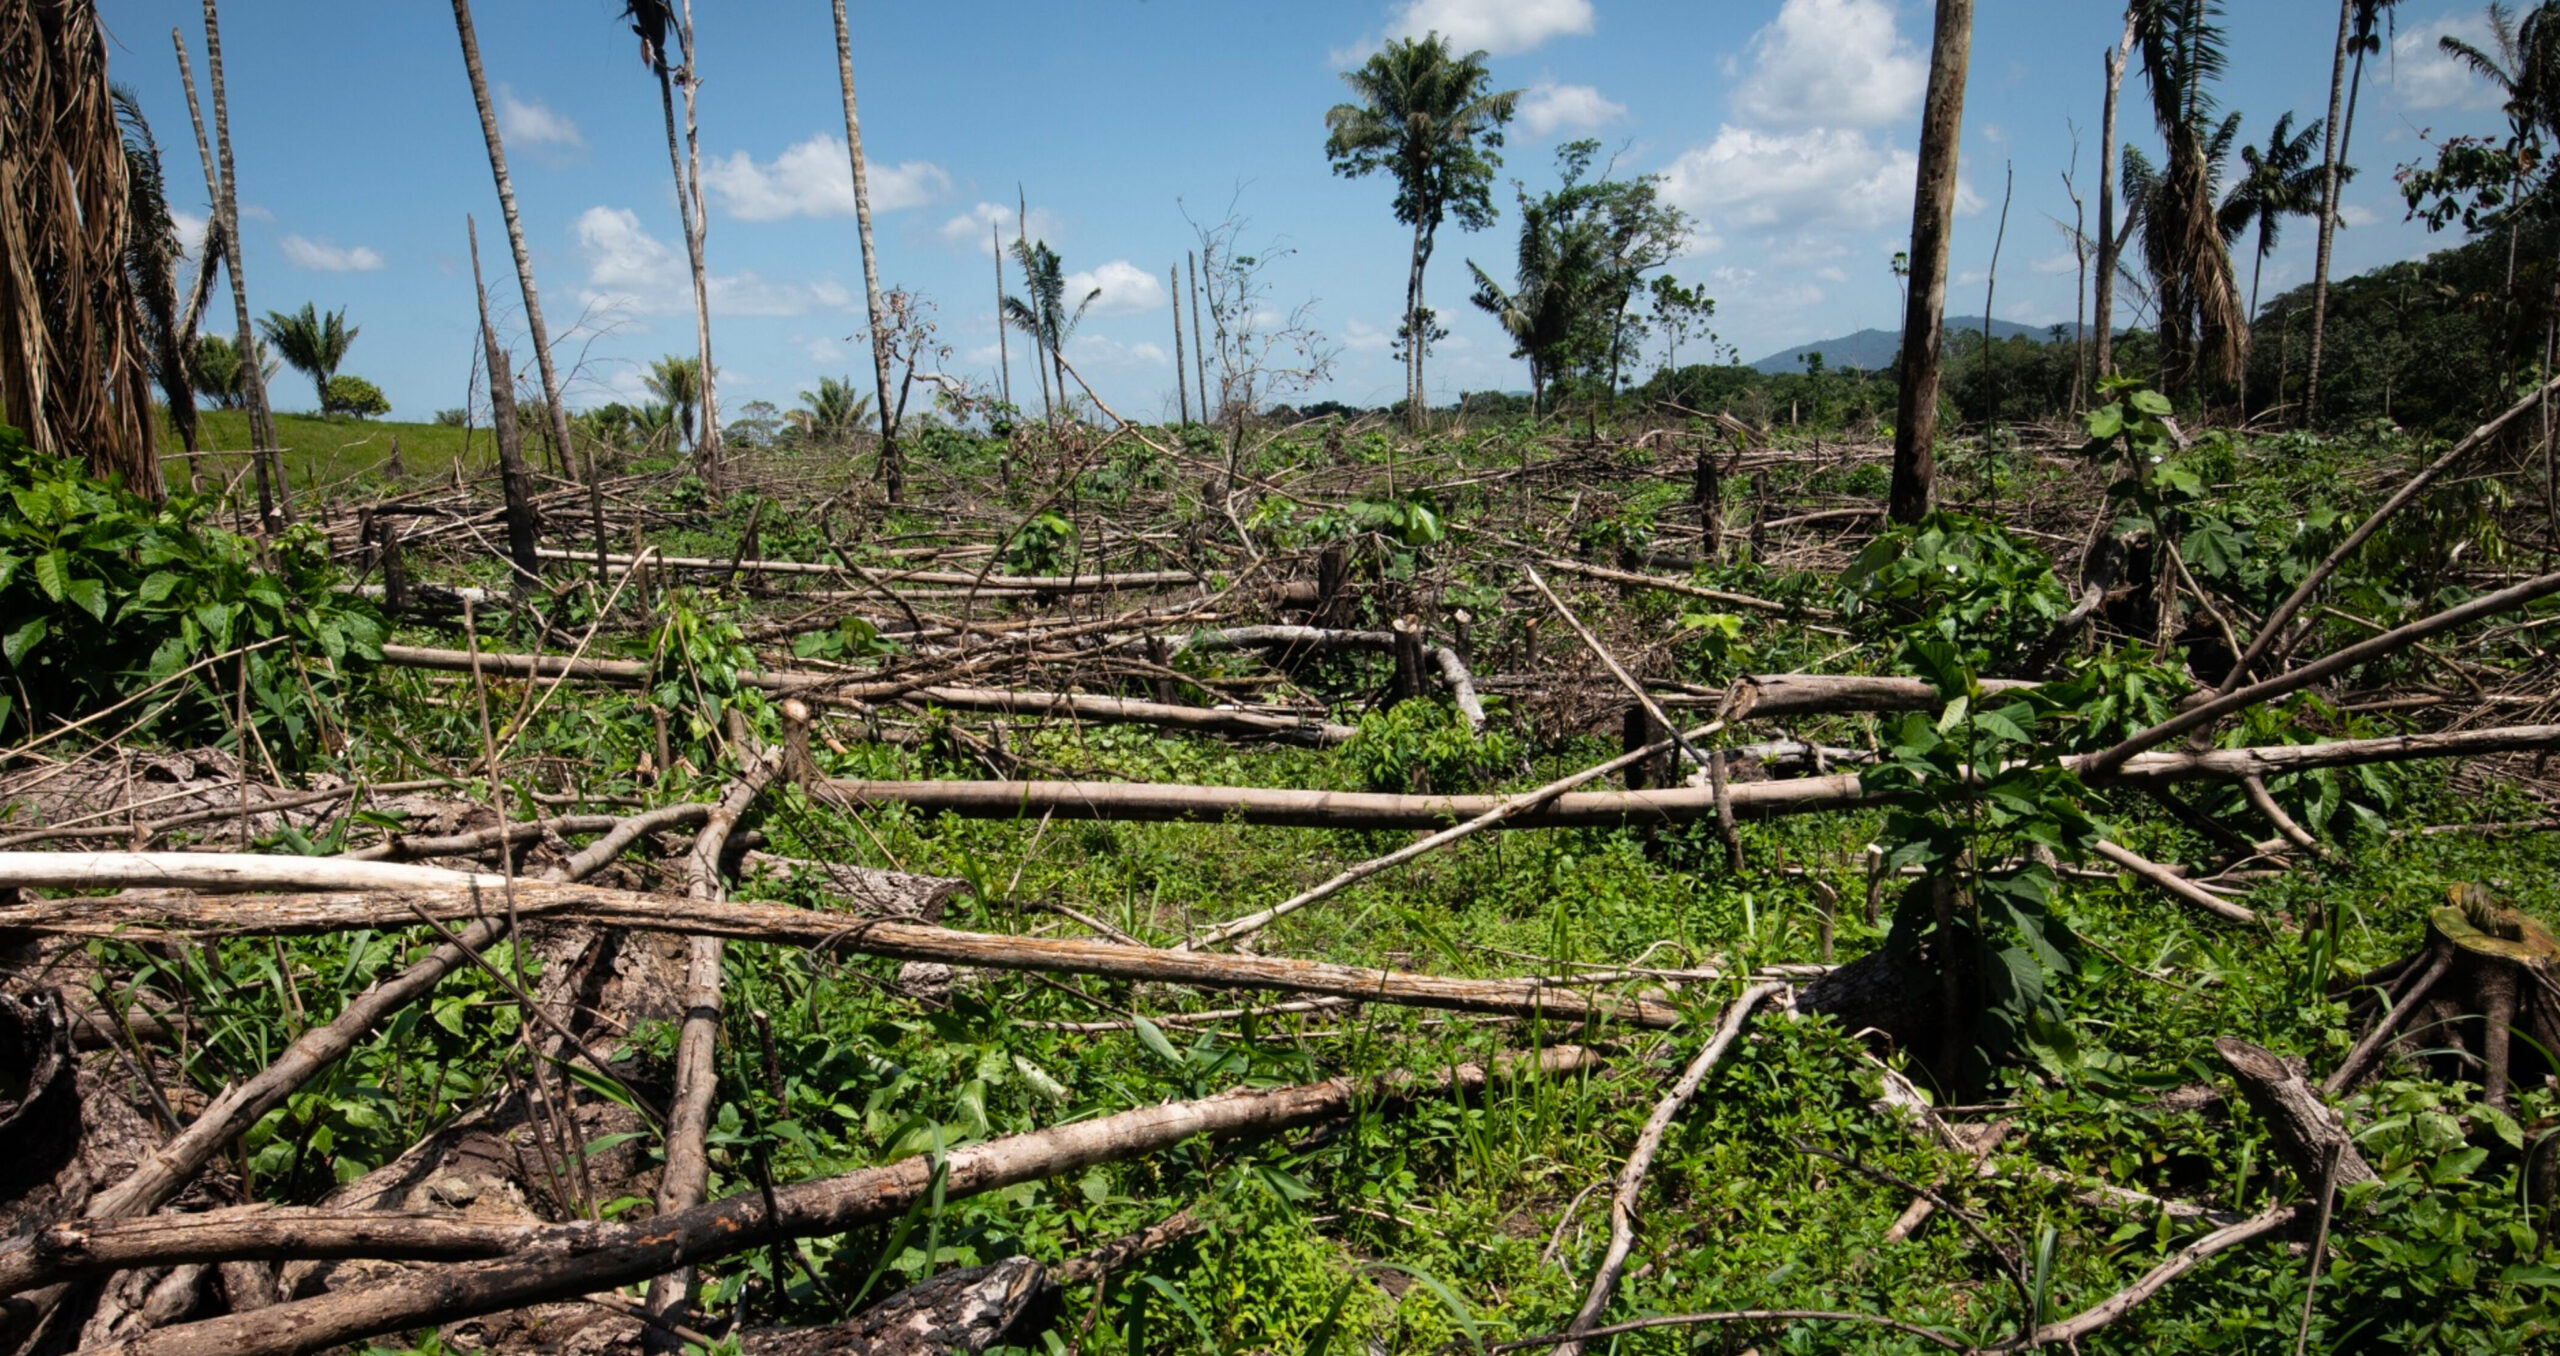 Discussions between sustainability professionals on a range of topics, from deforestation to child slavery and toxic pollution, often end up focusing on problems associated with defining and measuring indicators. (Photo: Ivan Valencia/Bloomberg) 